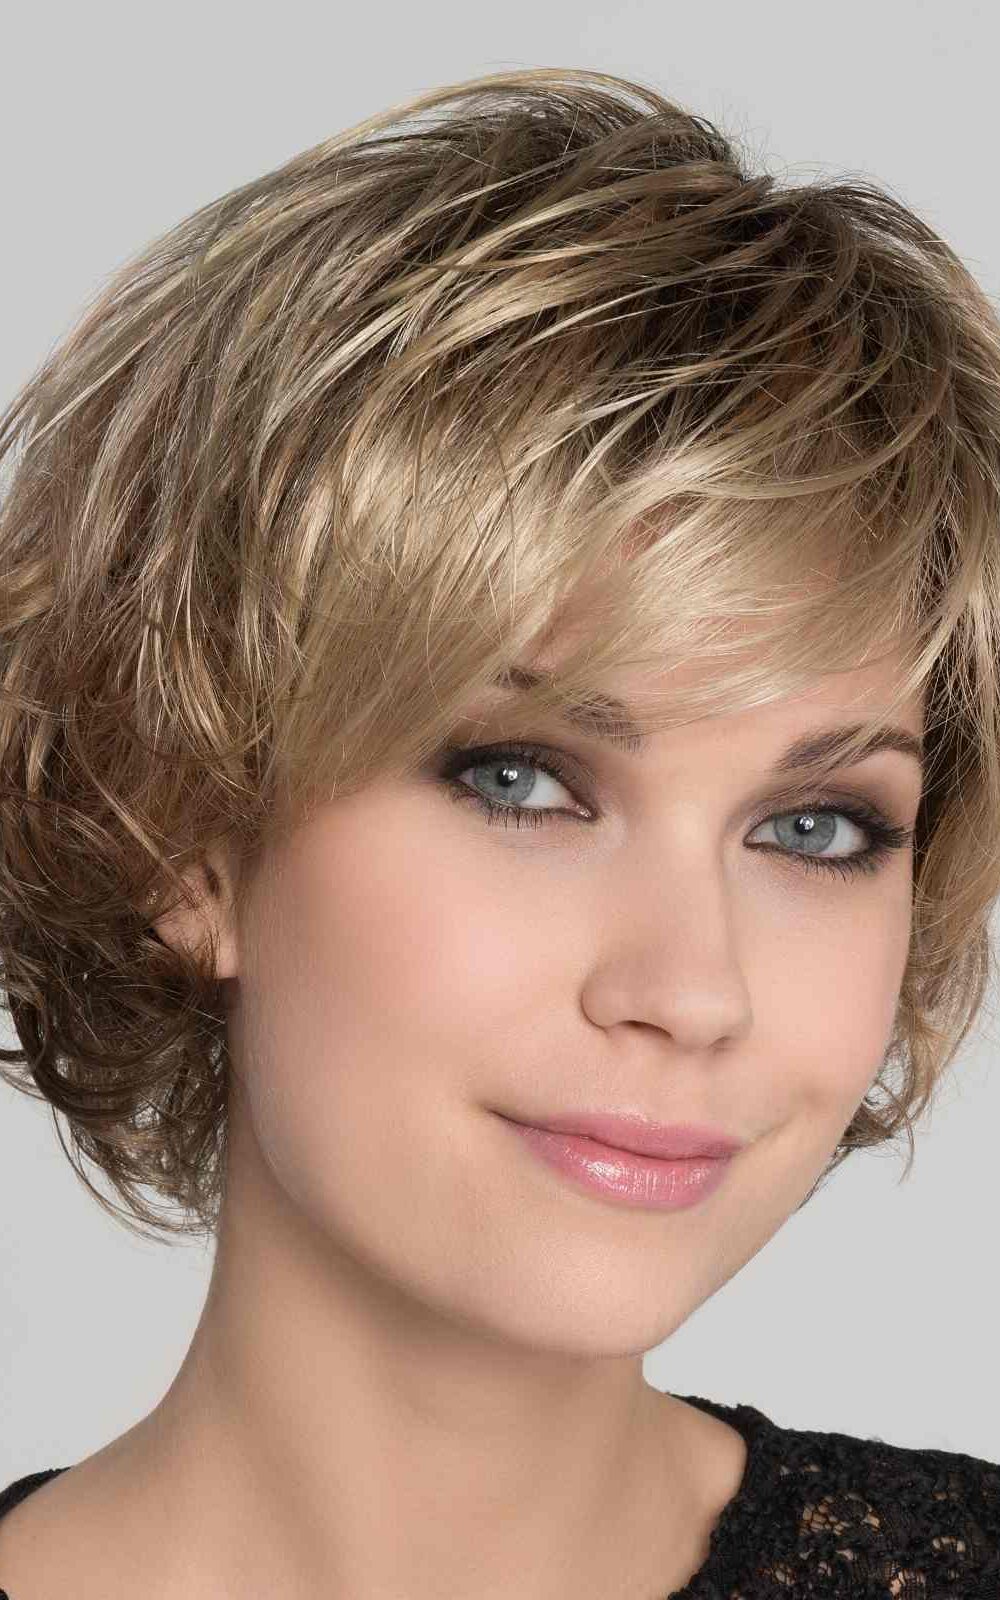 Flair by Ellen Wille | Mid-length, Layered, Softly Waved Bob with a Generous Fringe | Elly-K.com.au